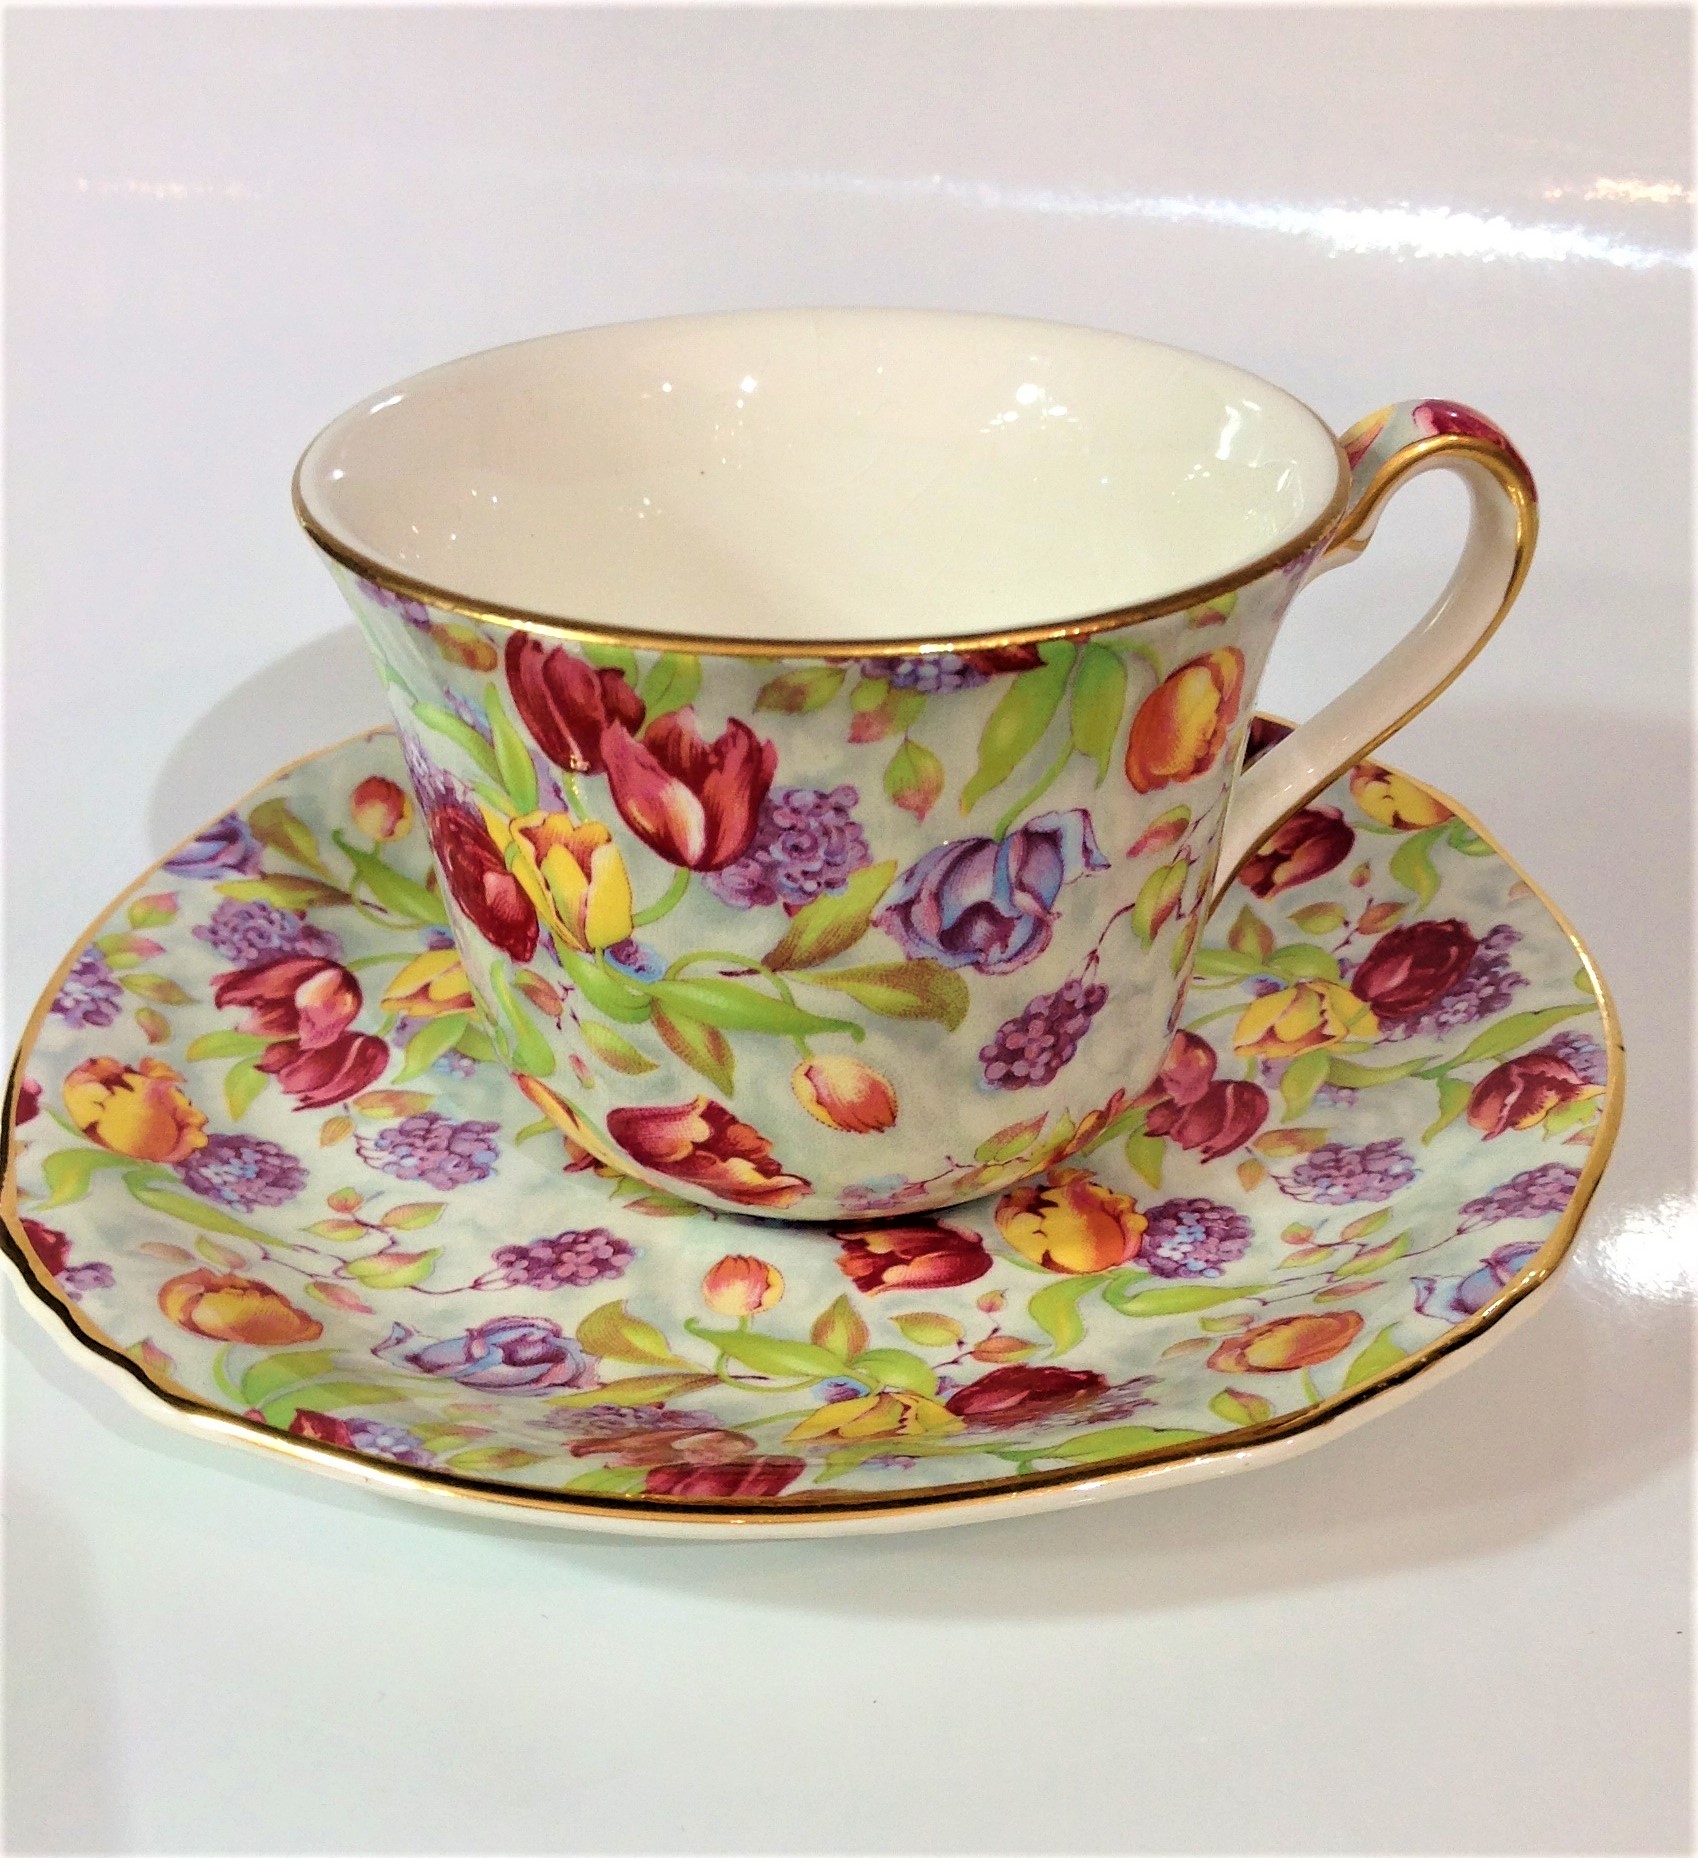 Stratford Cup and Saucer